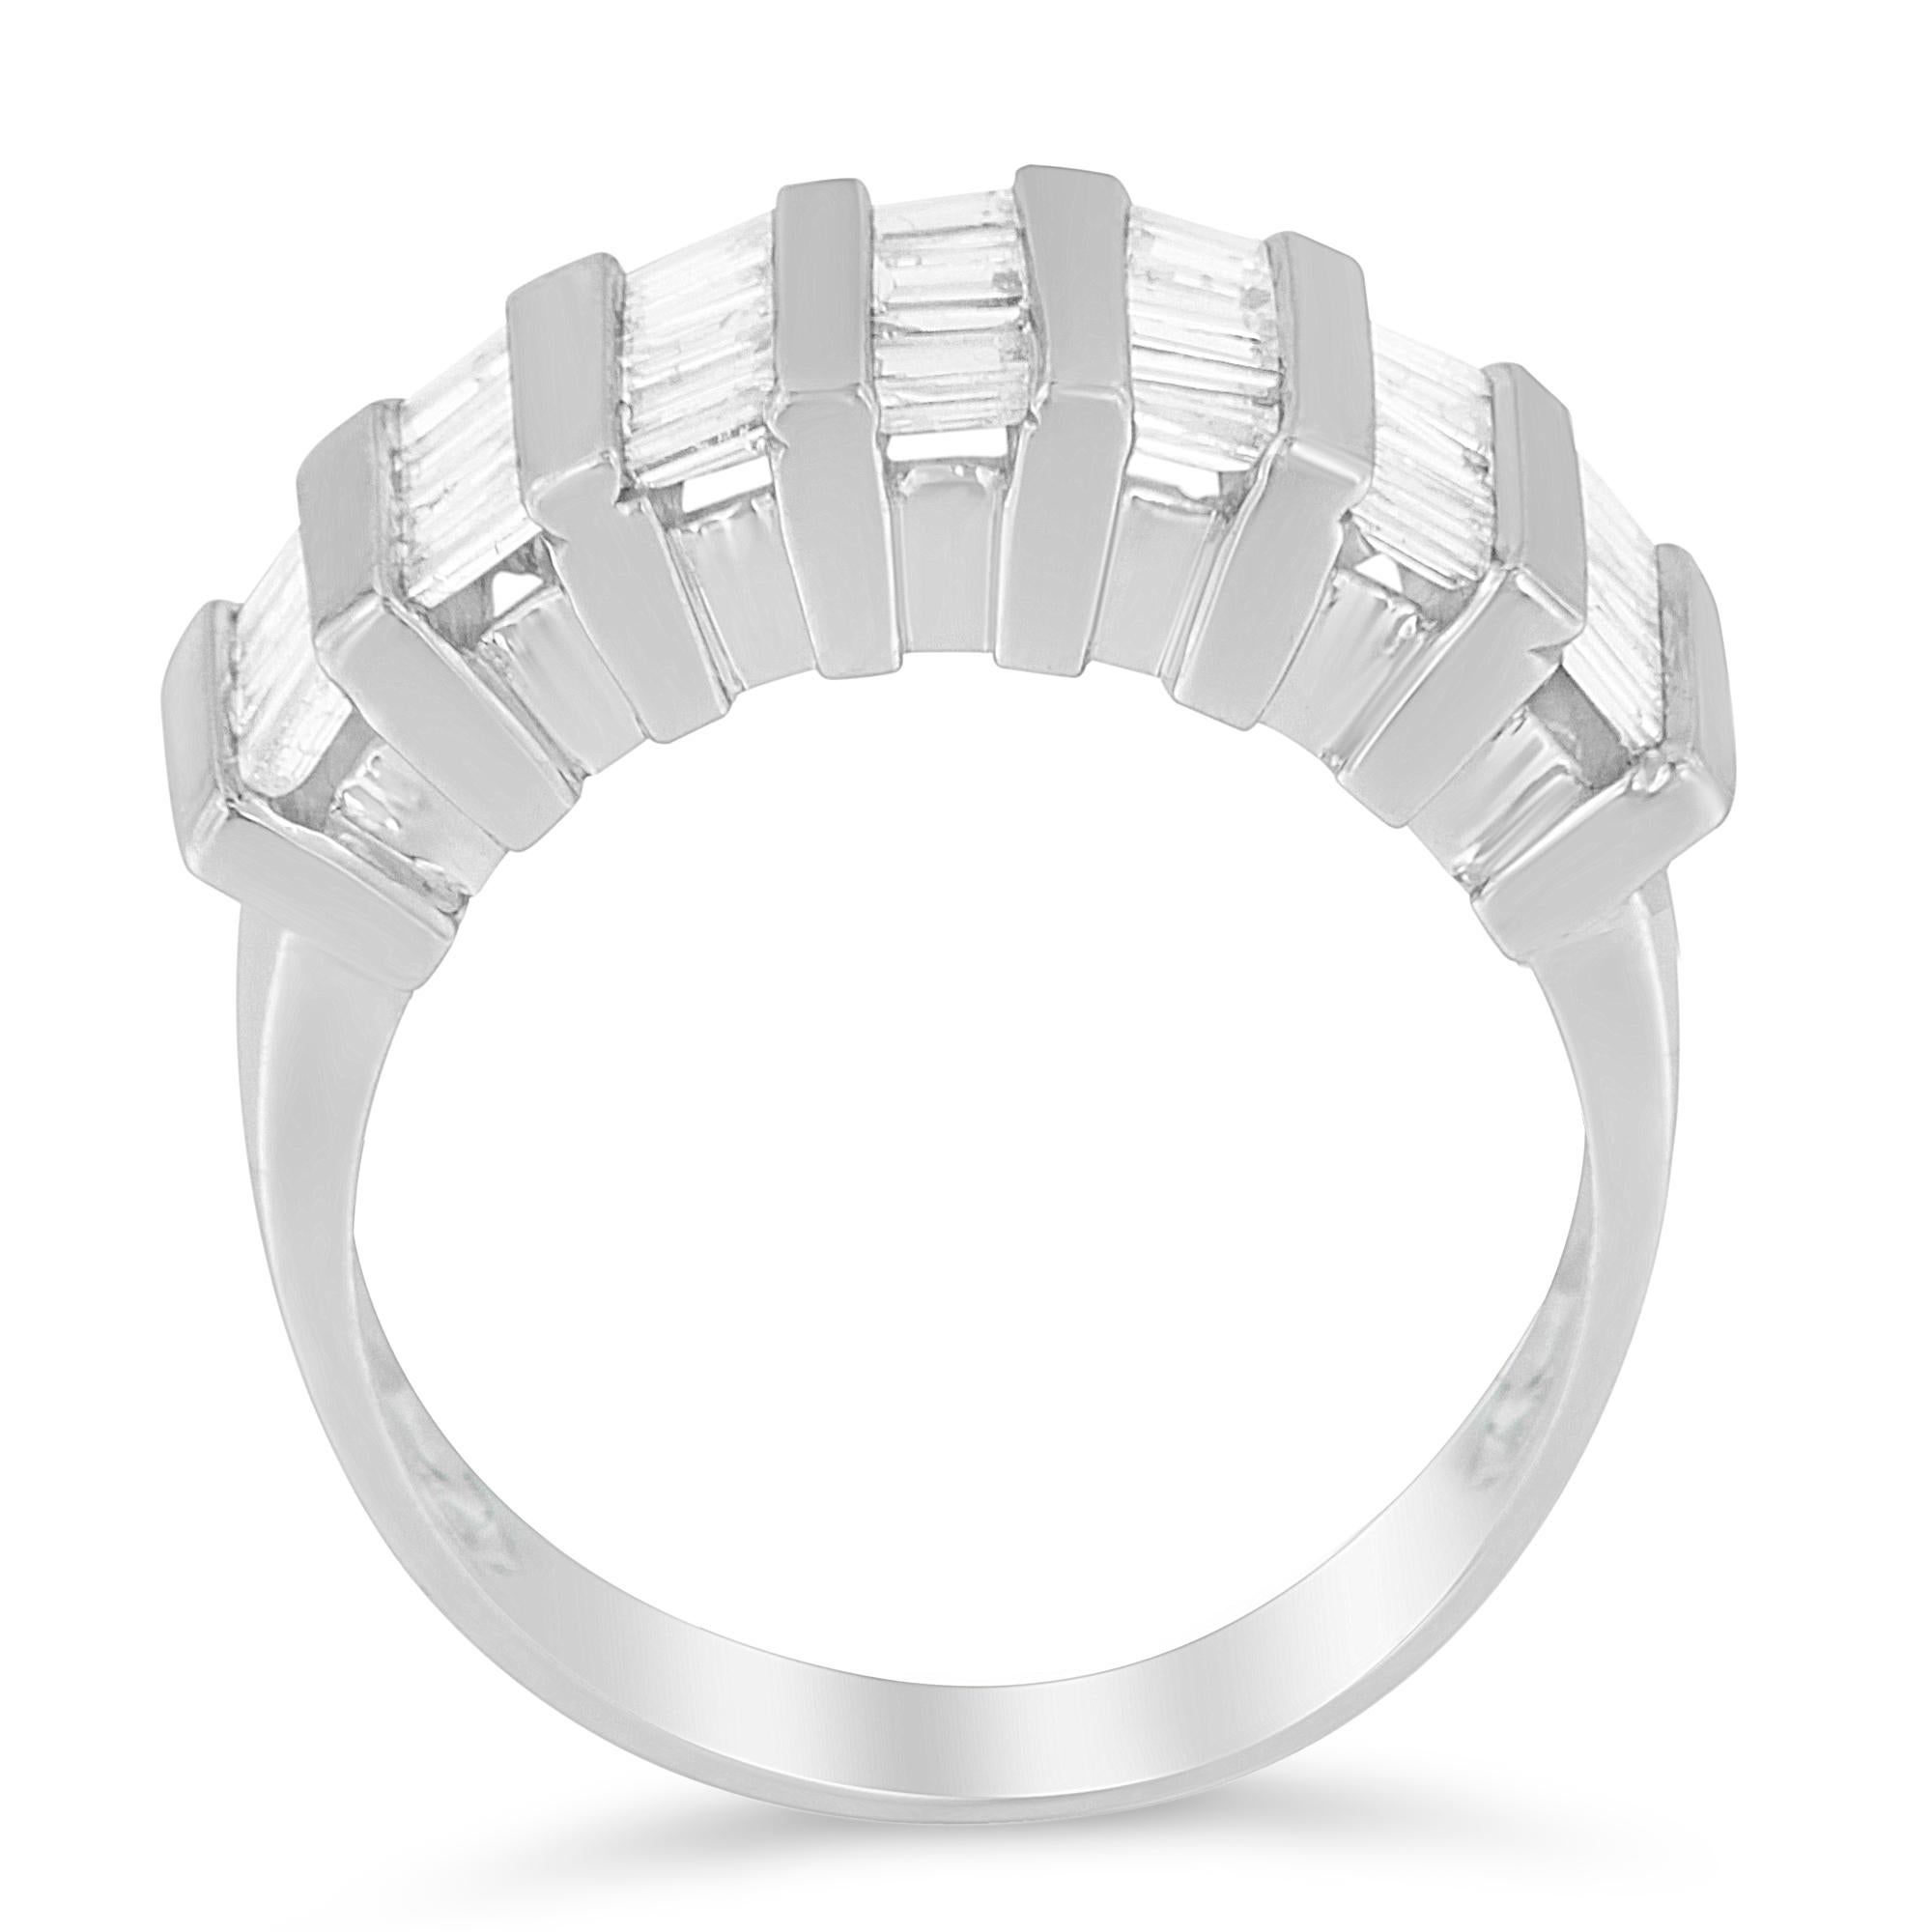 A unique multi-row diamond band ring that has a striking five rows of baguette diamonds set in cool sterling silver. The wide band has a total diamond weight of 1 carat.

'Video Available Upon Request'

Product features:

Diamond Type: Natural White